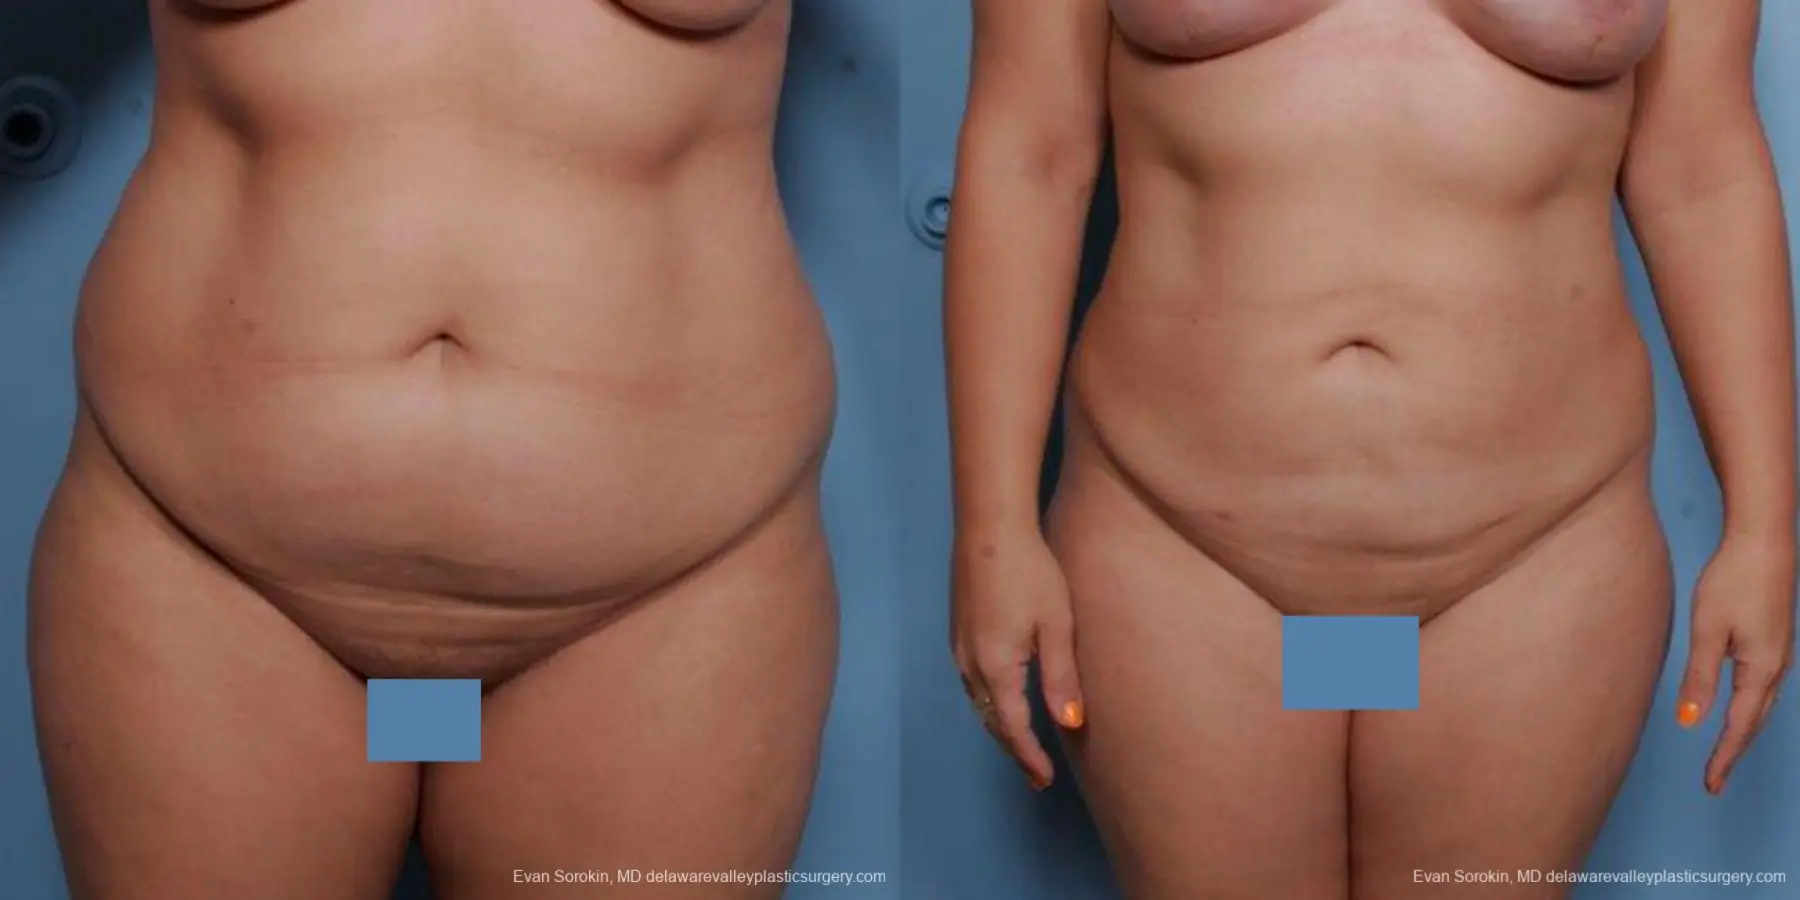 Philadelphia Liposuction 9481 - Before and After